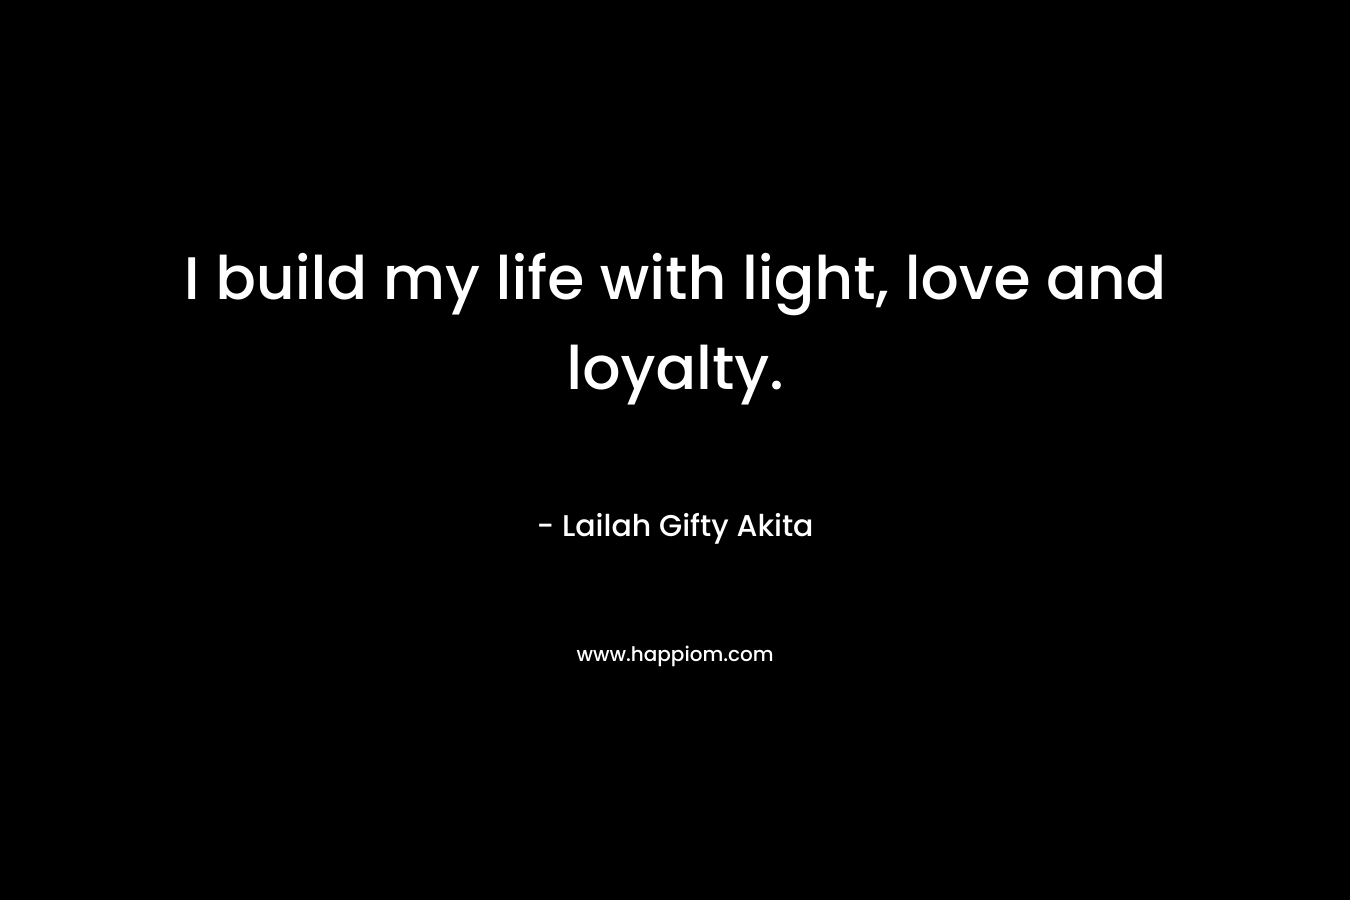 I build my life with light, love and loyalty.